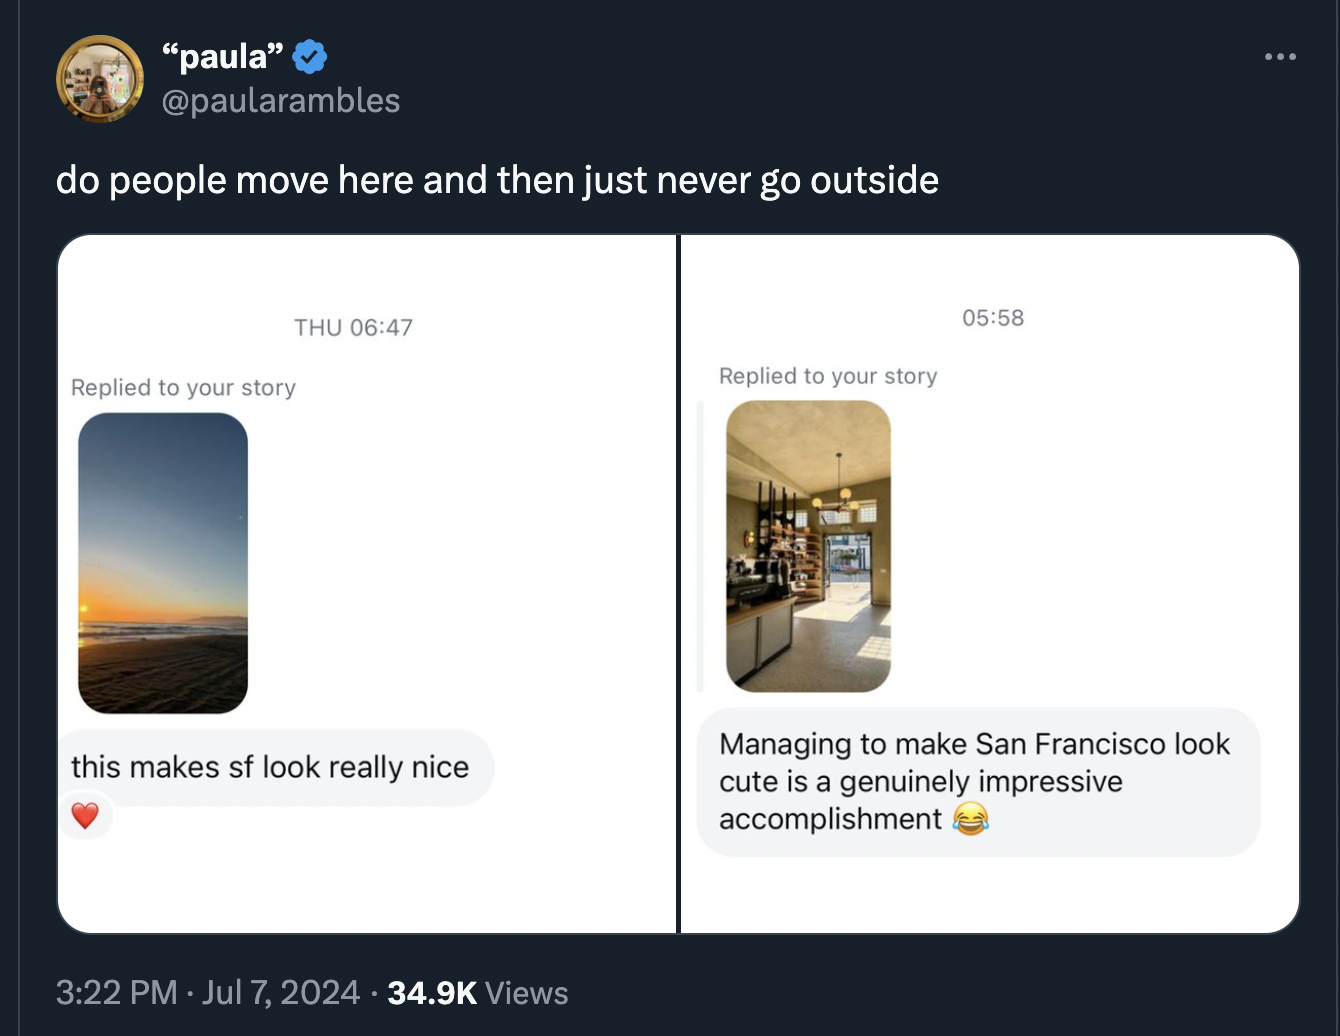 screenshot - "paula" do people move here and then just never go outside Replied to your story Thu Replied to your story this makes sf look really nice Managing to make San Francisco look cute is a genuinely impressive accomplishment Views